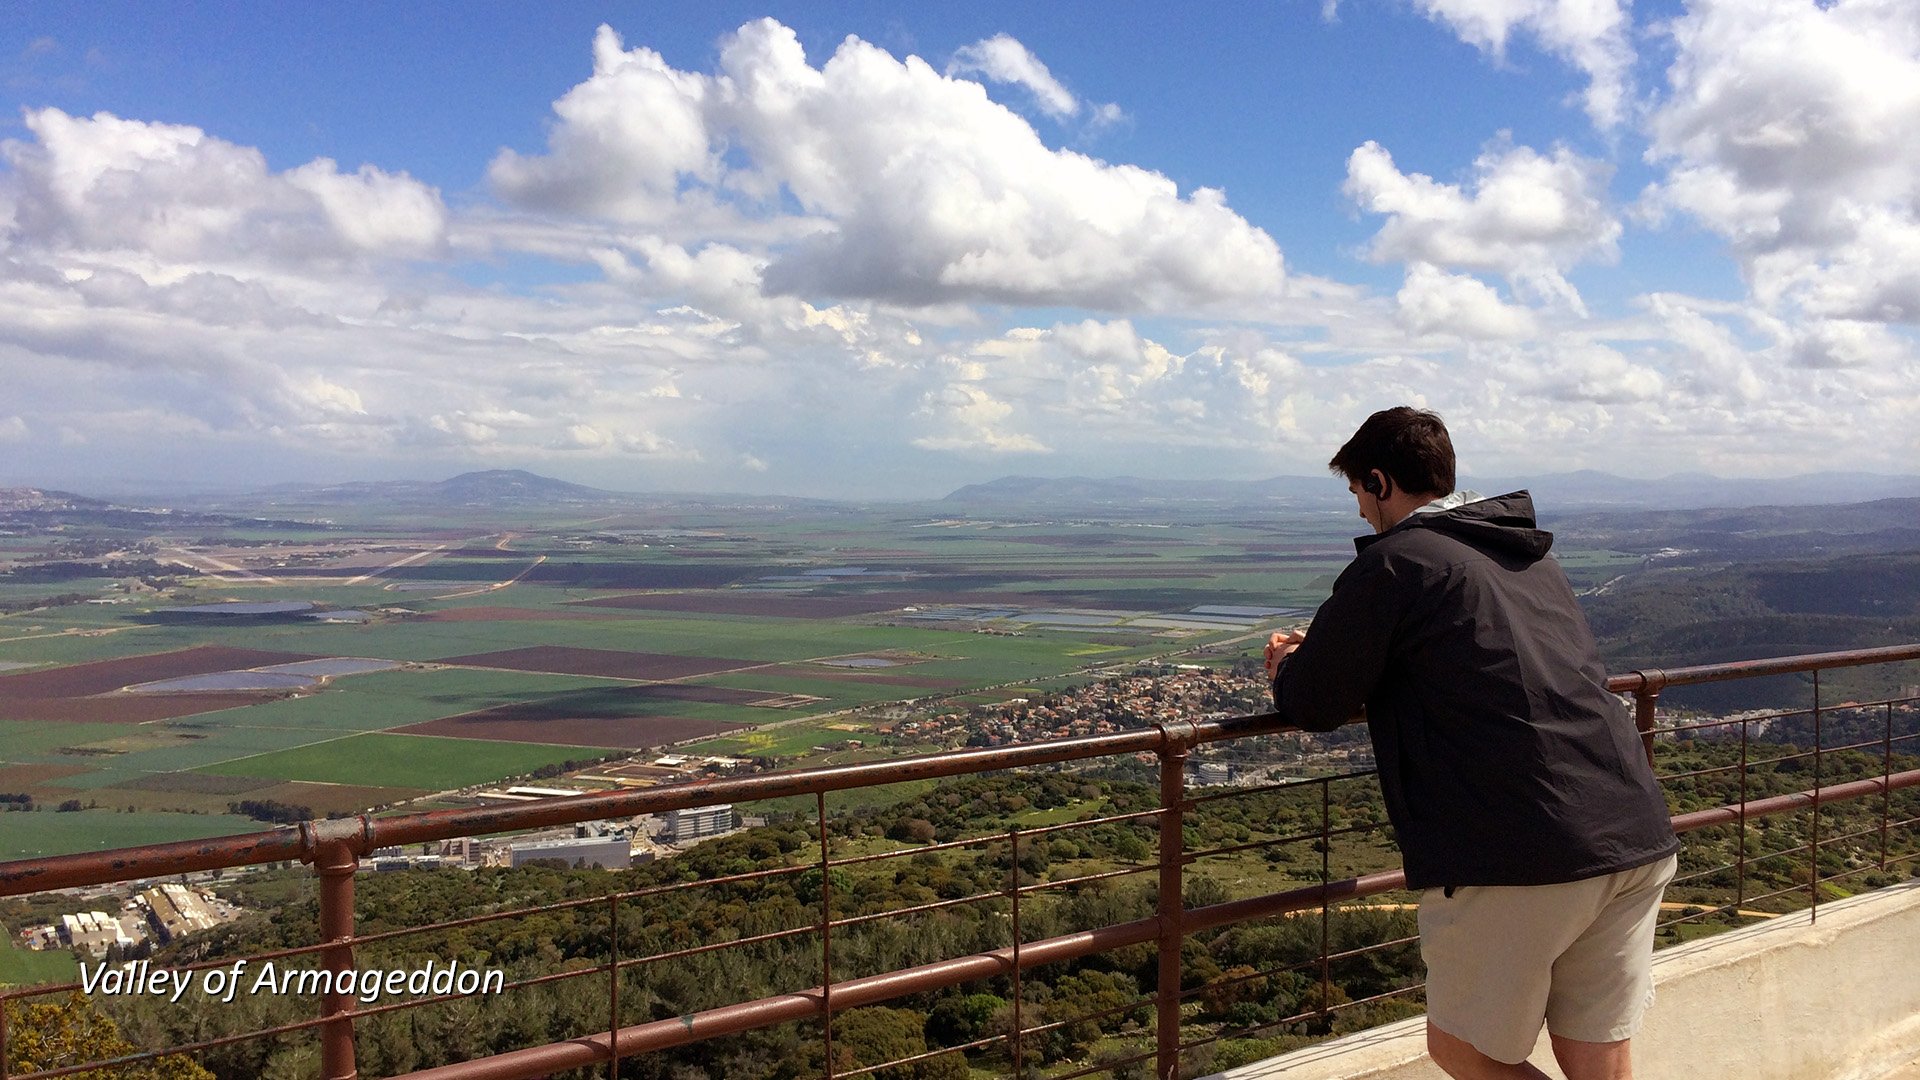 Mount Carmel View with Person - Captioned.jpg